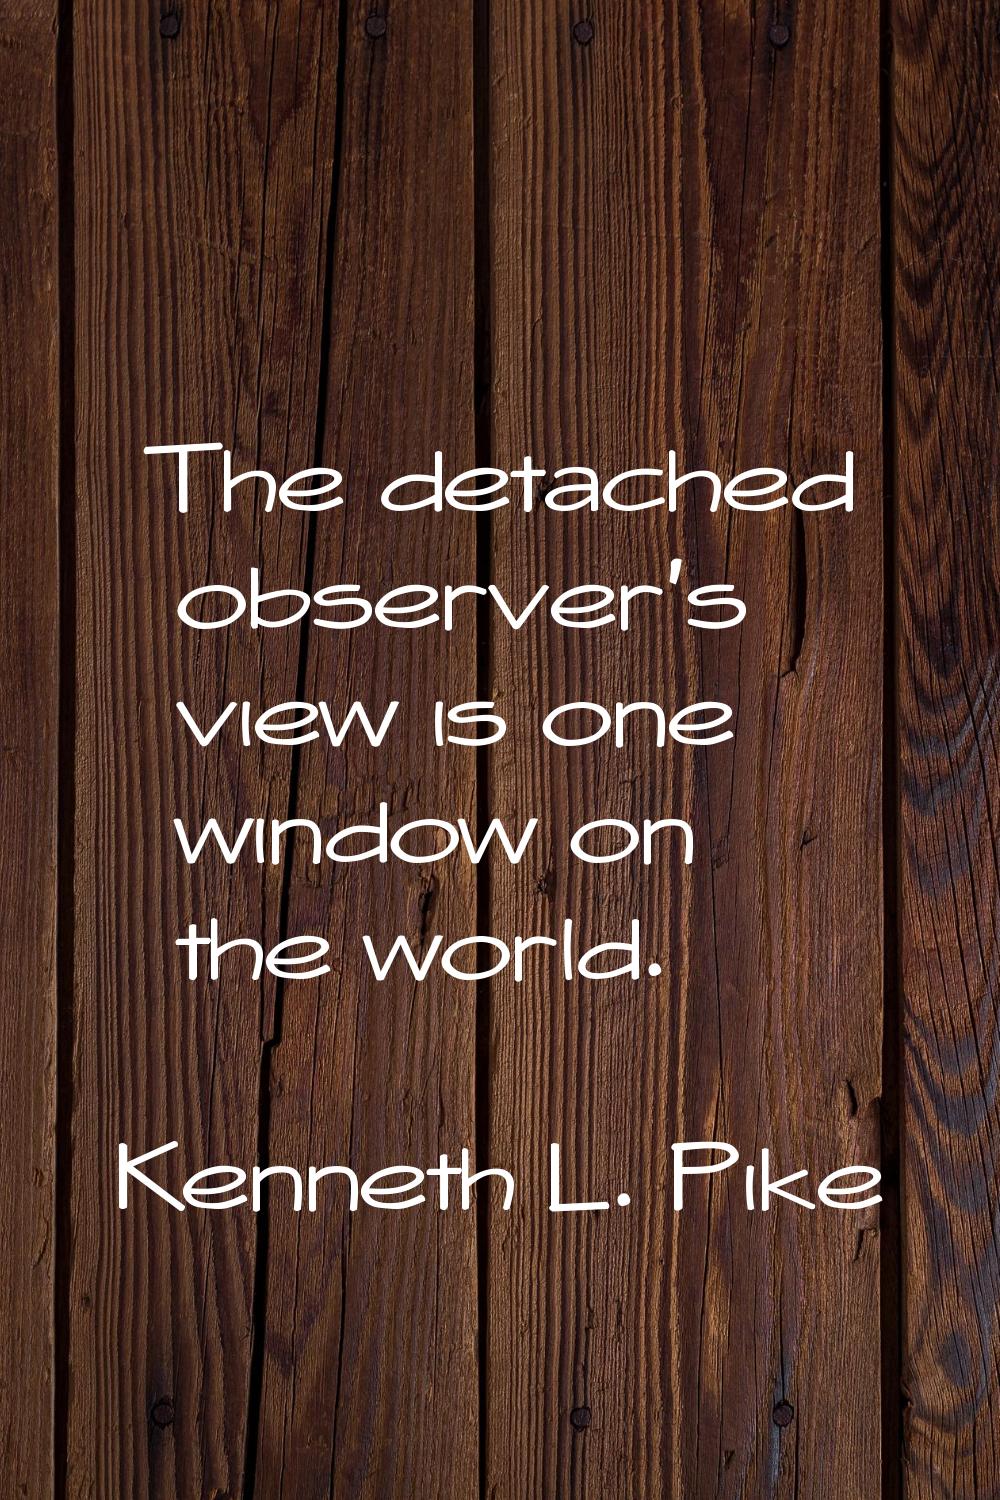 The detached observer's view is one window on the world.